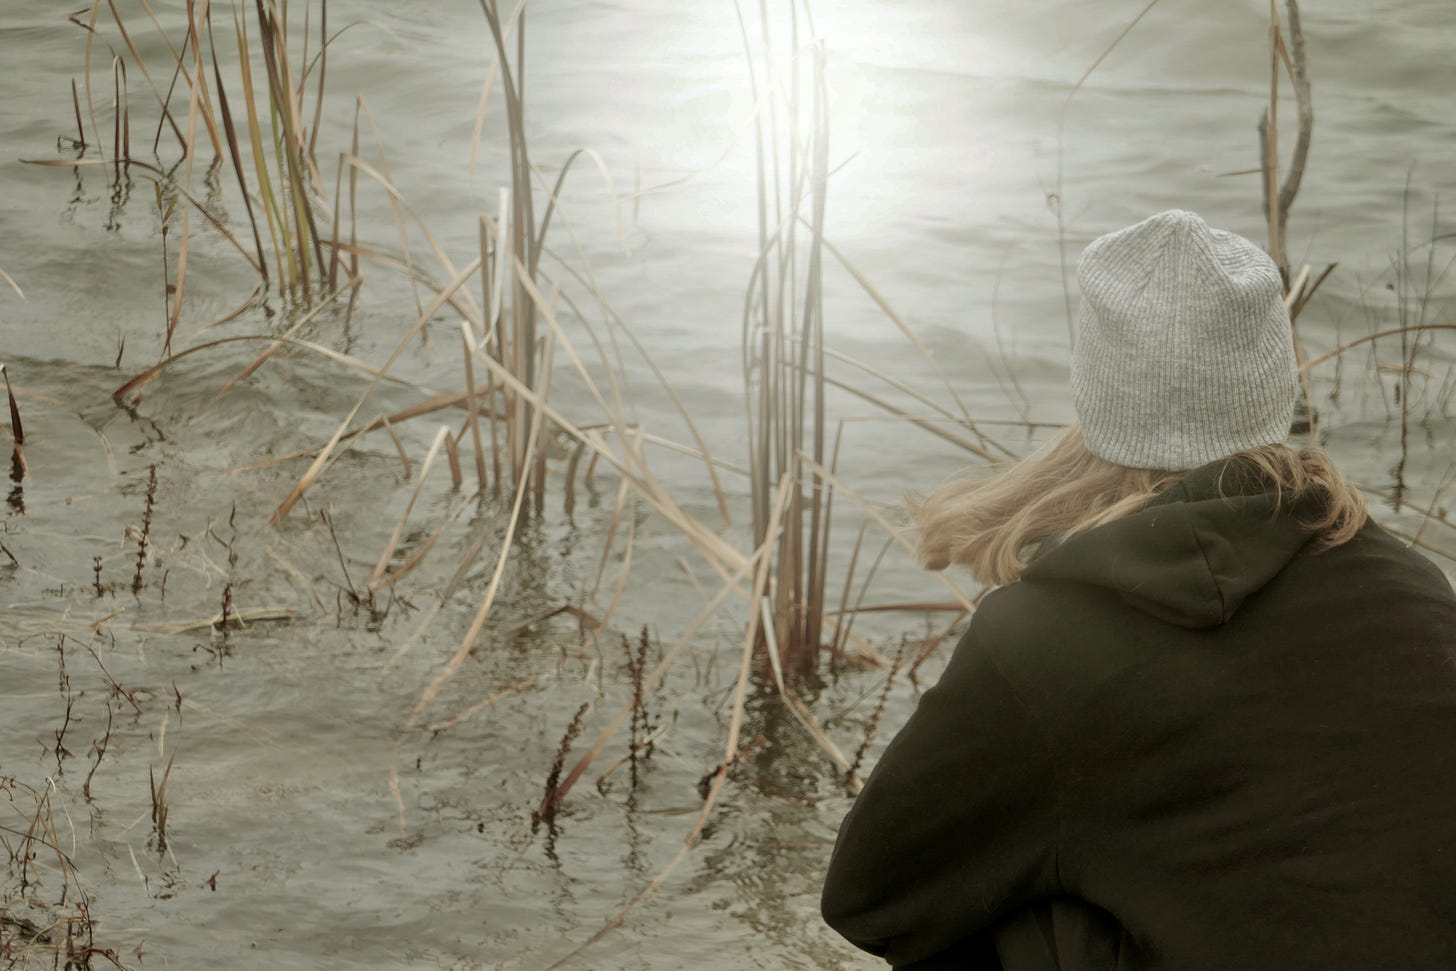 A young woman in a gray knit cap with long blond hair looks sits on the bank looking out across the shore with lake grass in the forefront and the sun light shining in the muted colors of the lake